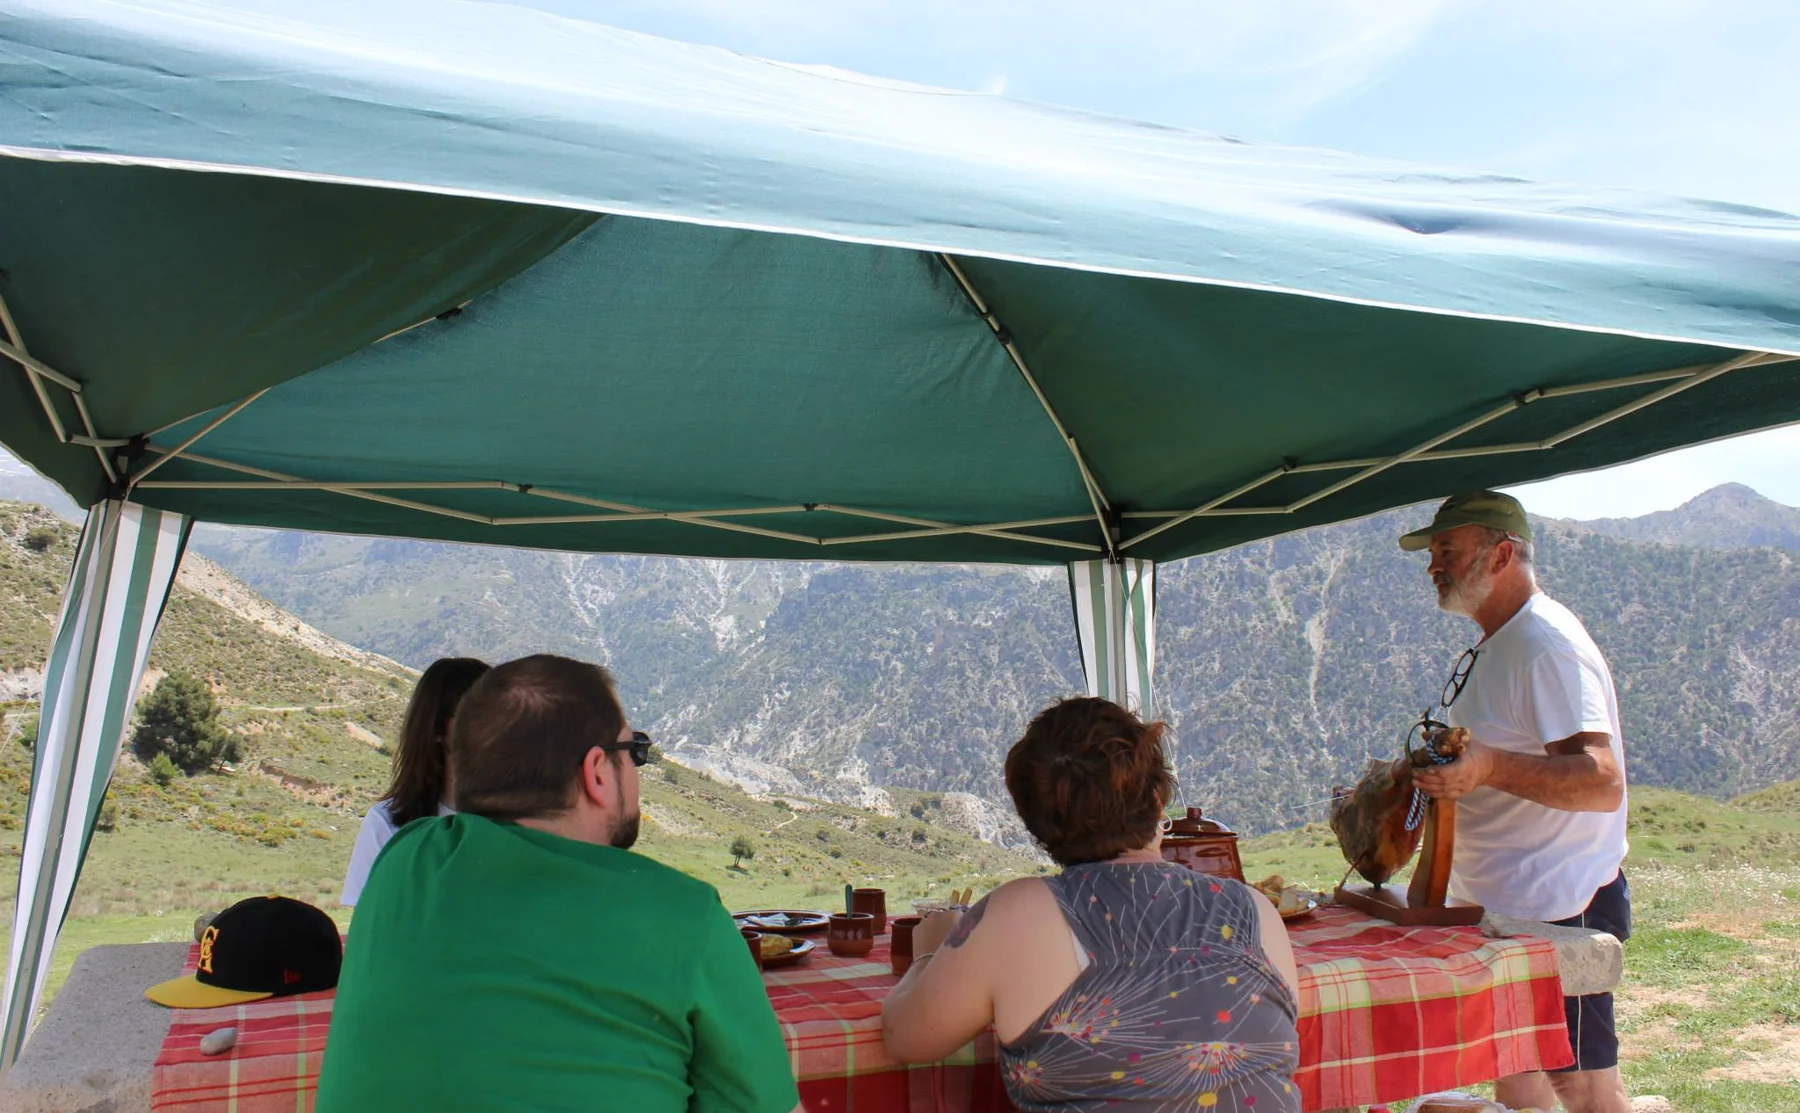 Andalusian picnic in the Granada countryside - 639462